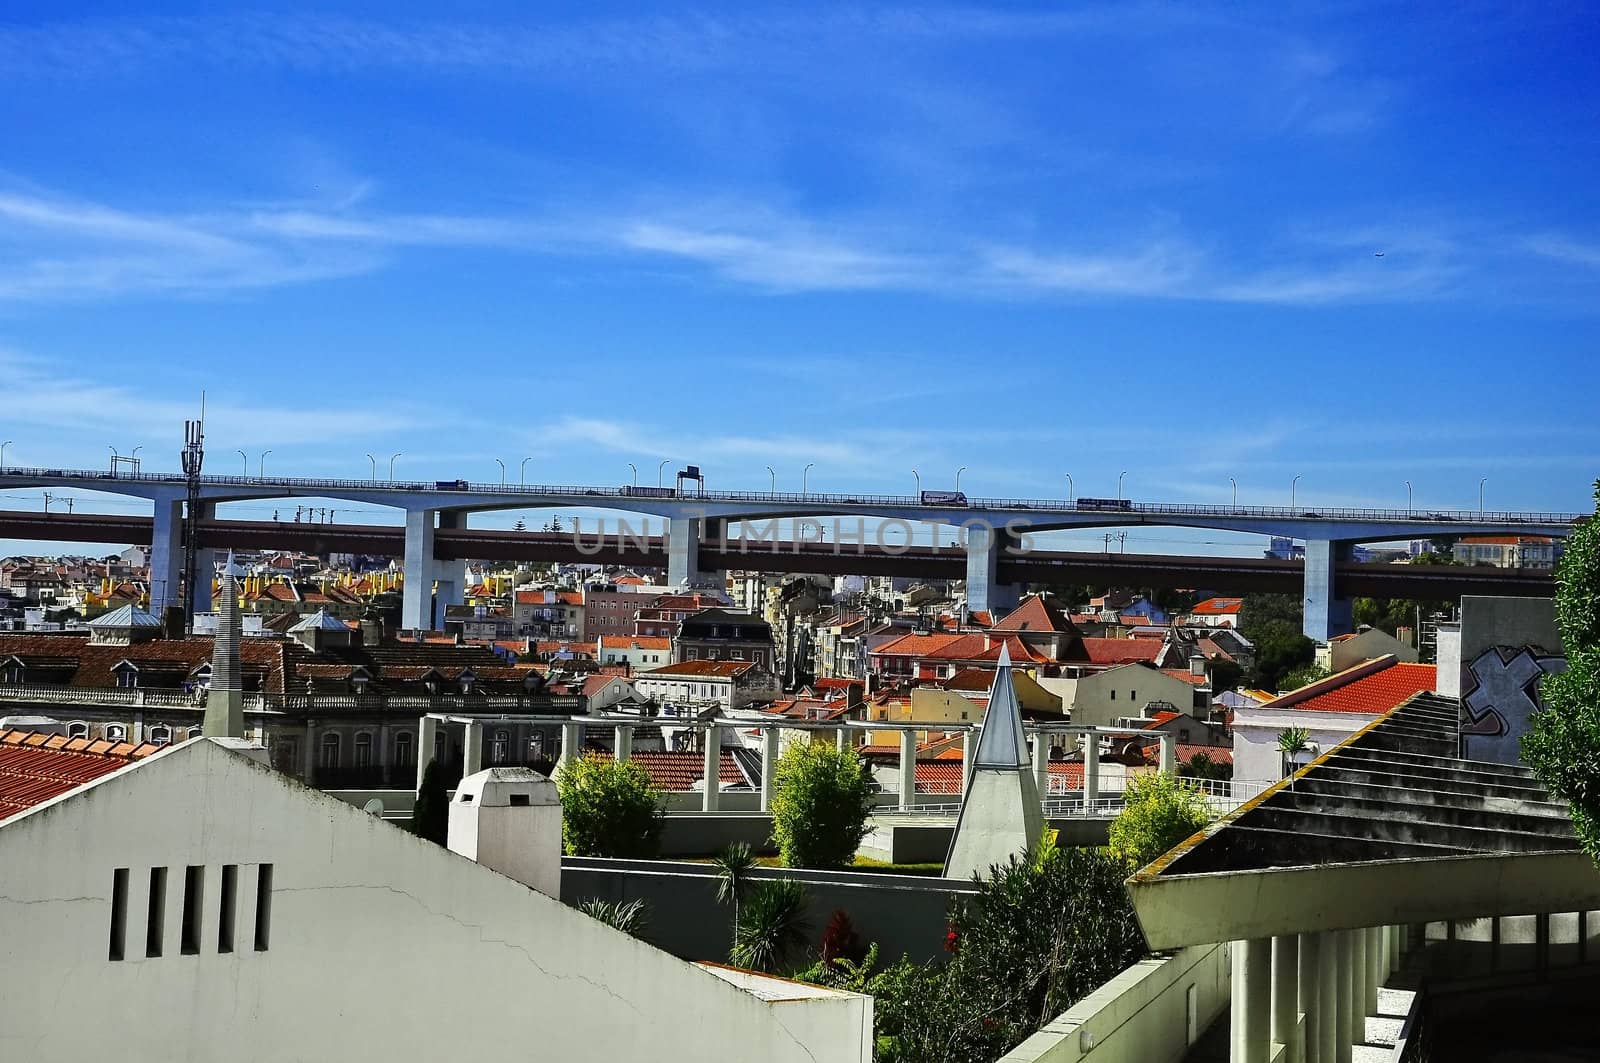 cities, portugal, architecture, lisbon, travel, old, traditional, house